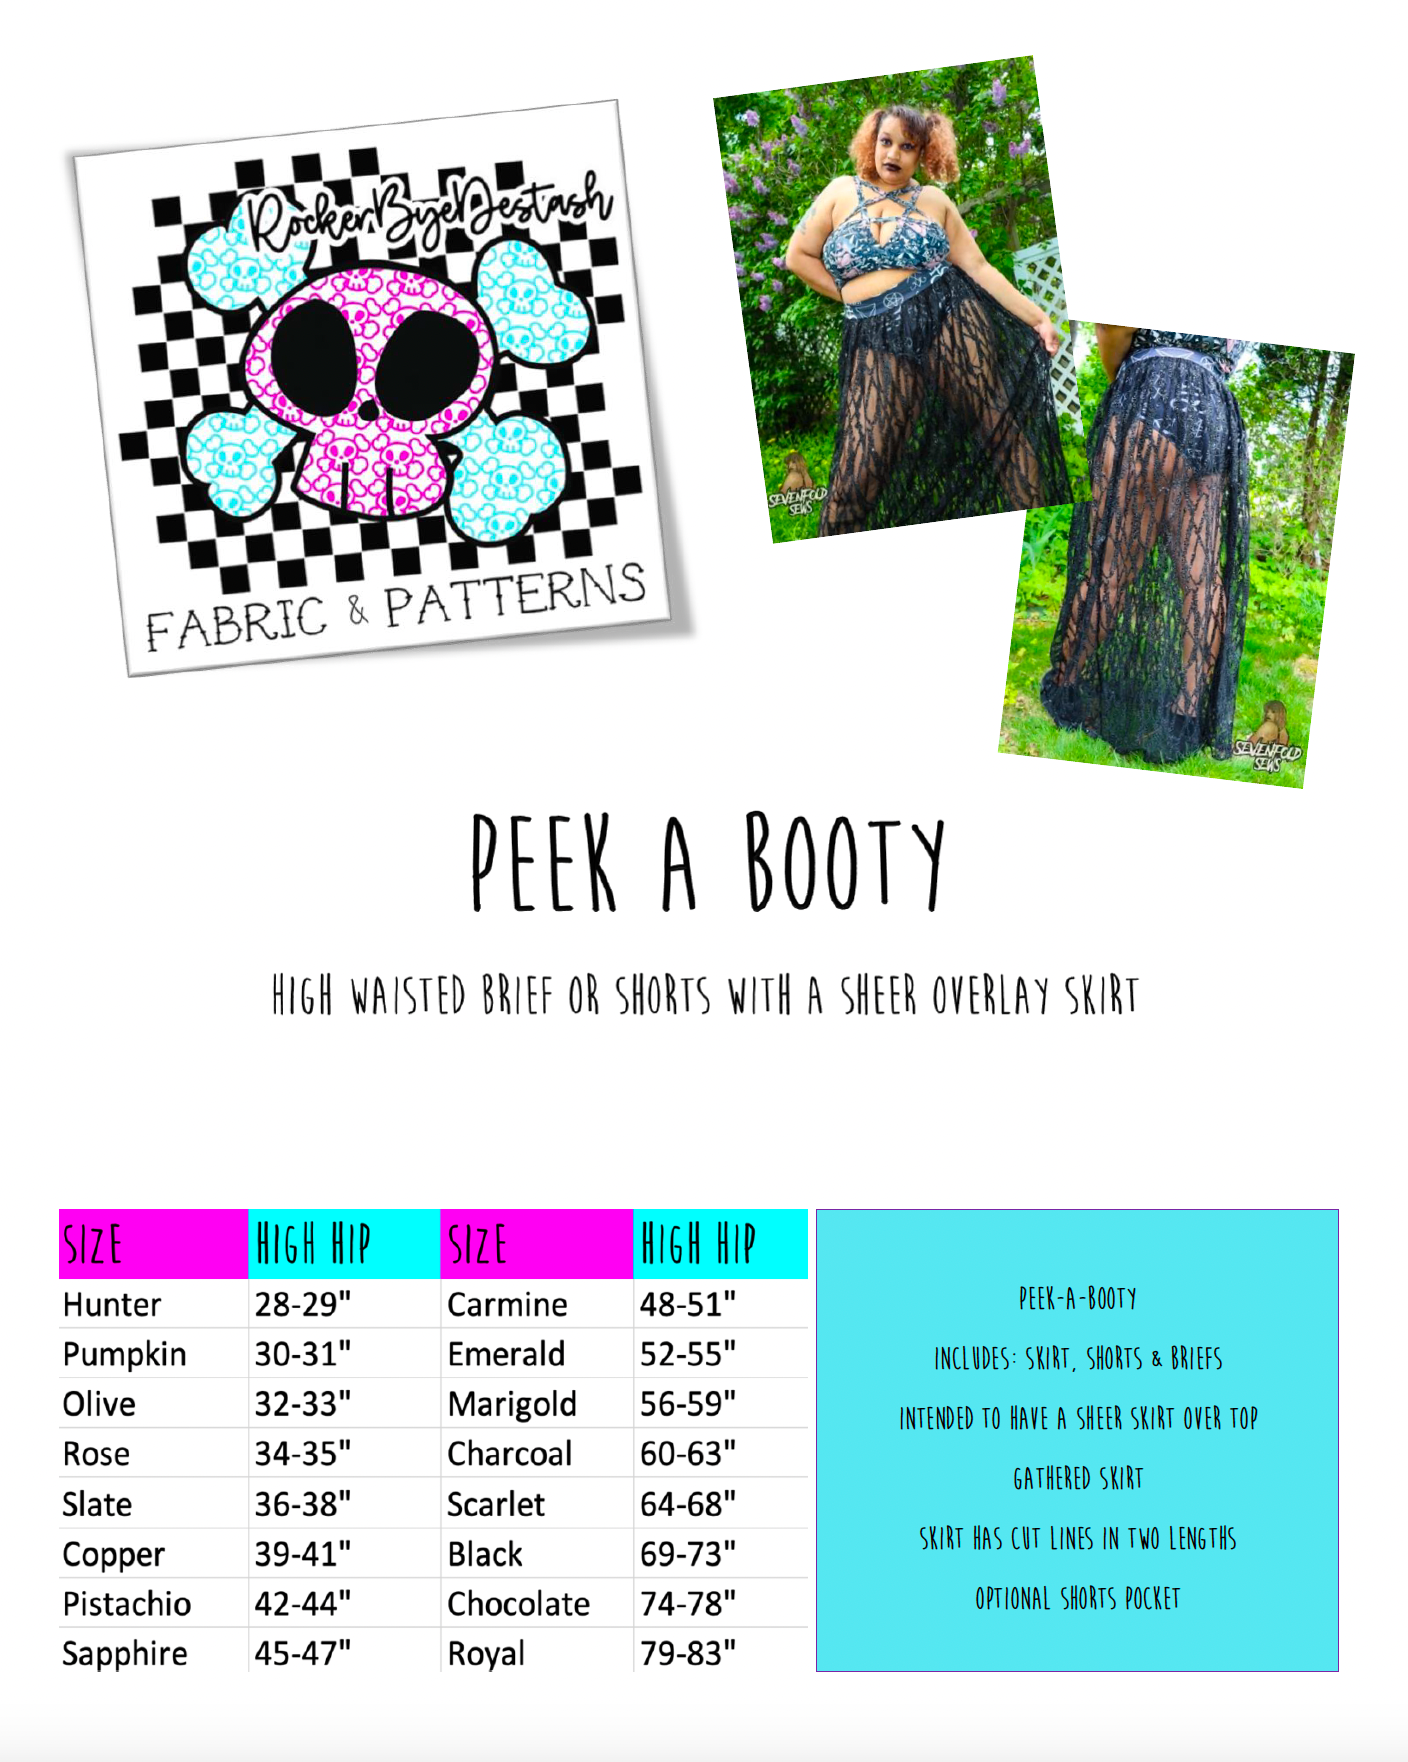 Peek A Booty Skirt Brief and Shorts- Digital PDF Sewing Pattern - Size 28" hip to 83" hip